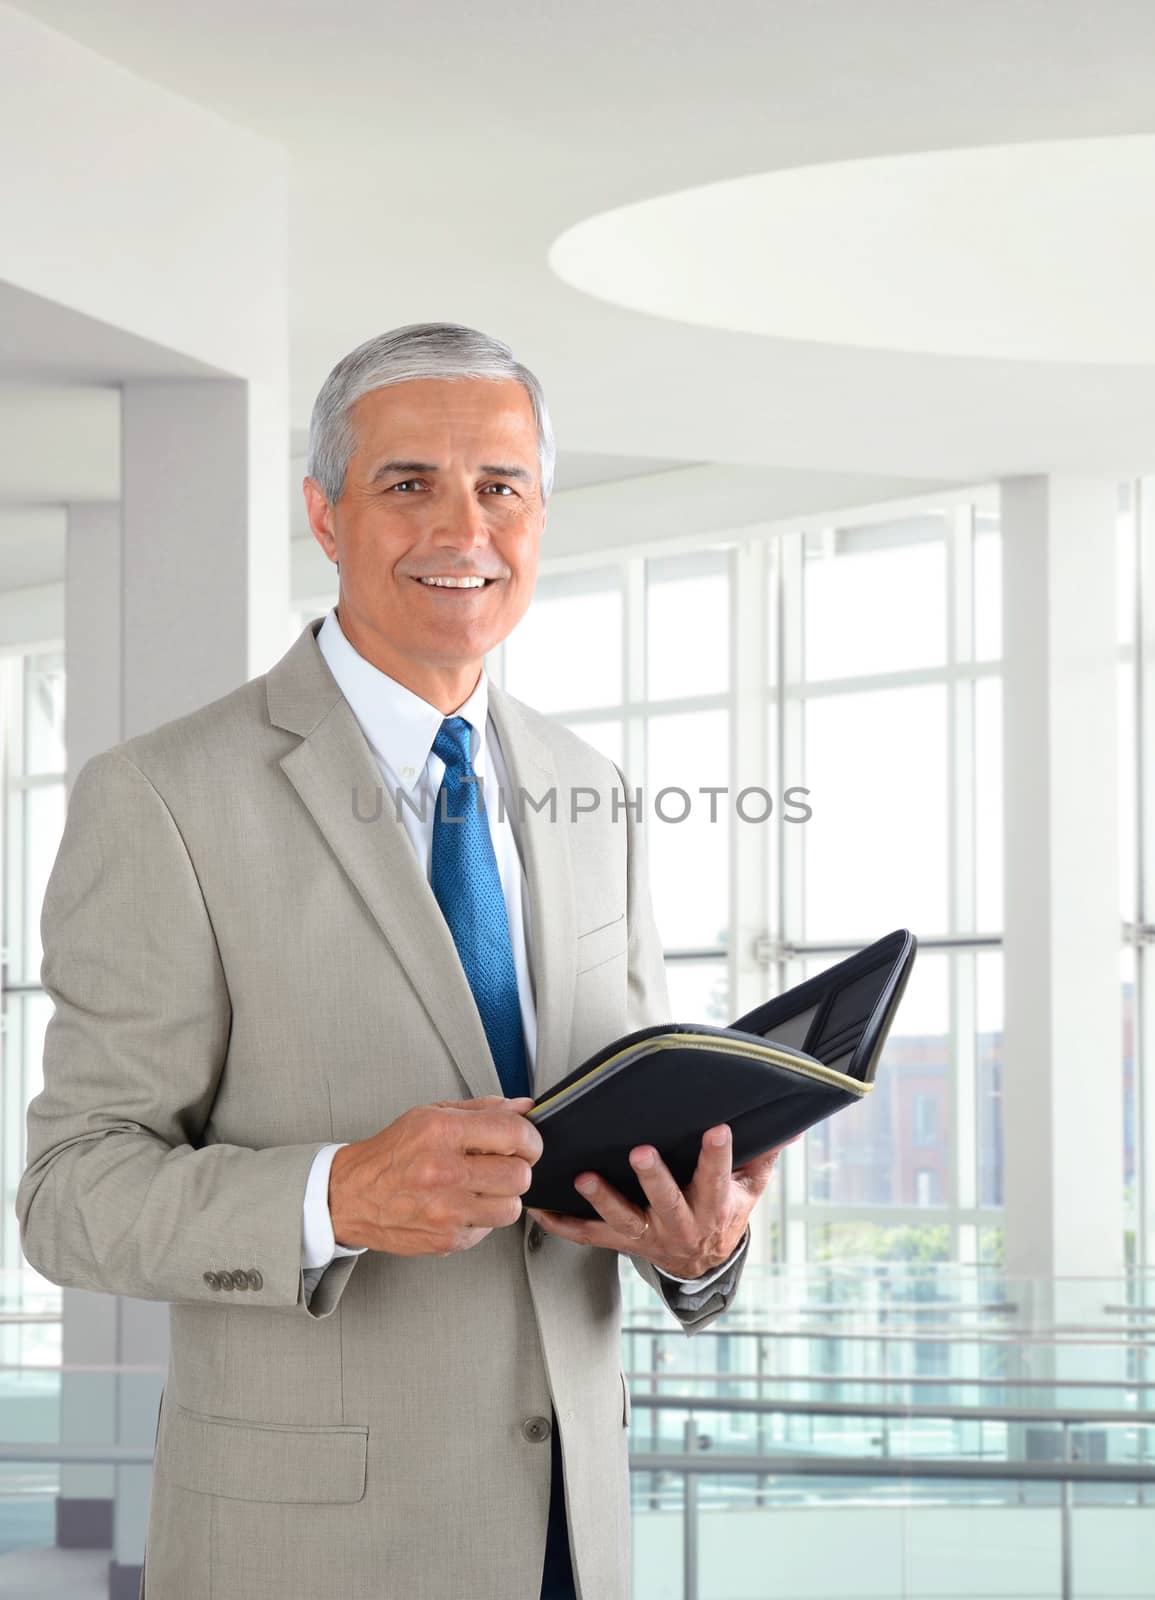 Portrait of a middle aged businessman standing in a modern office. Man is holding a small binder and smiling at the camera.